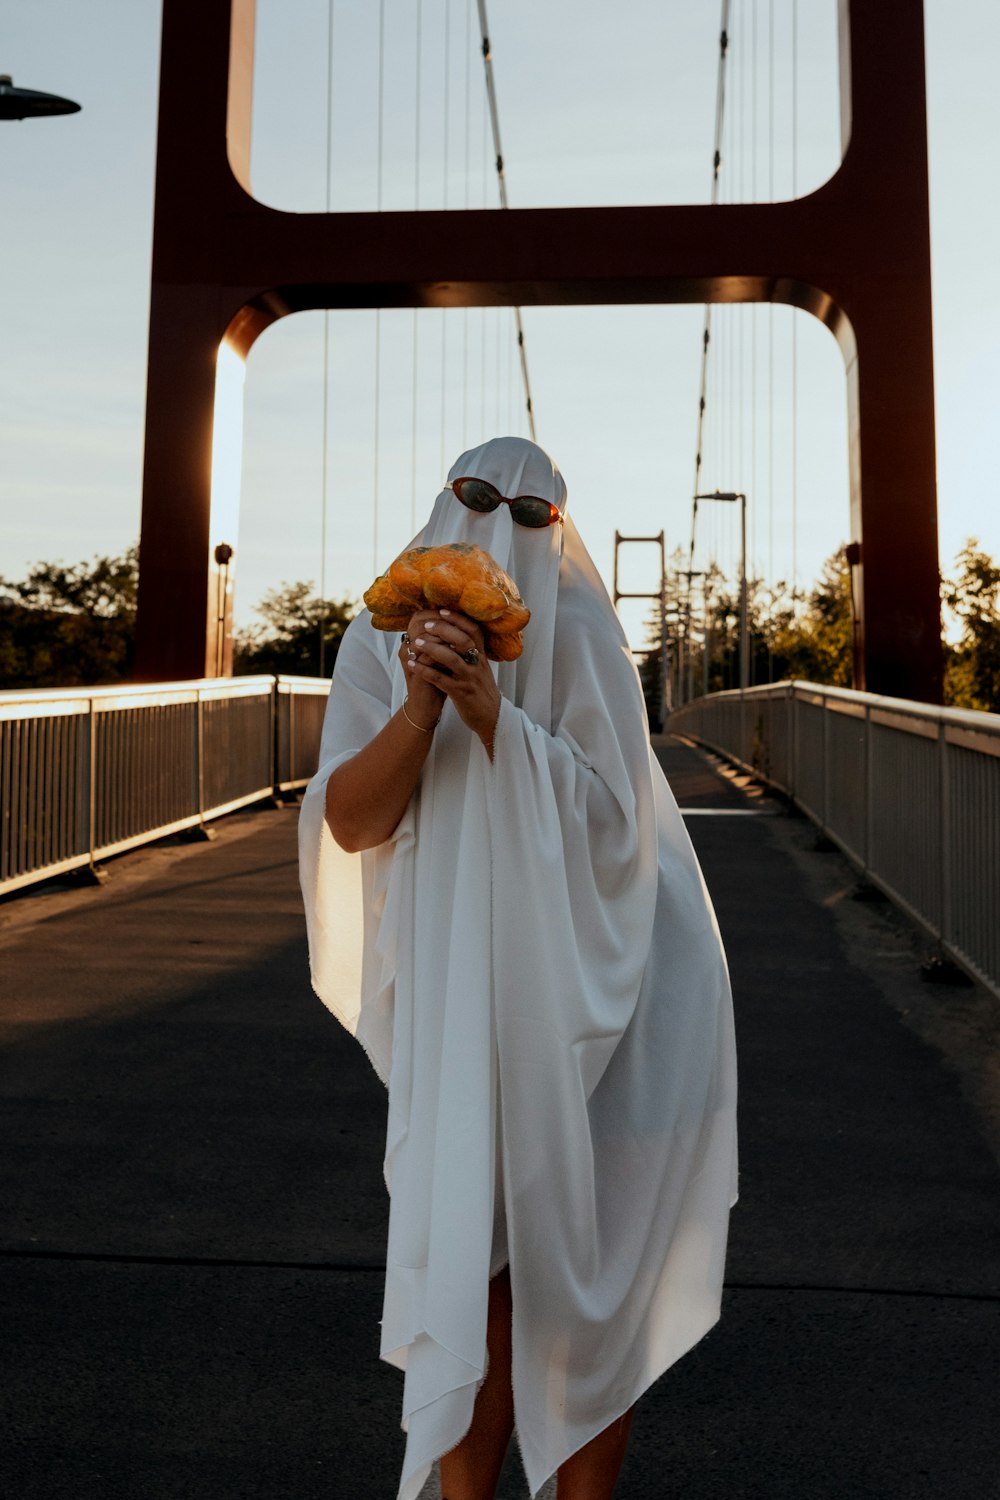 a man wearing a white robe and holding a burger